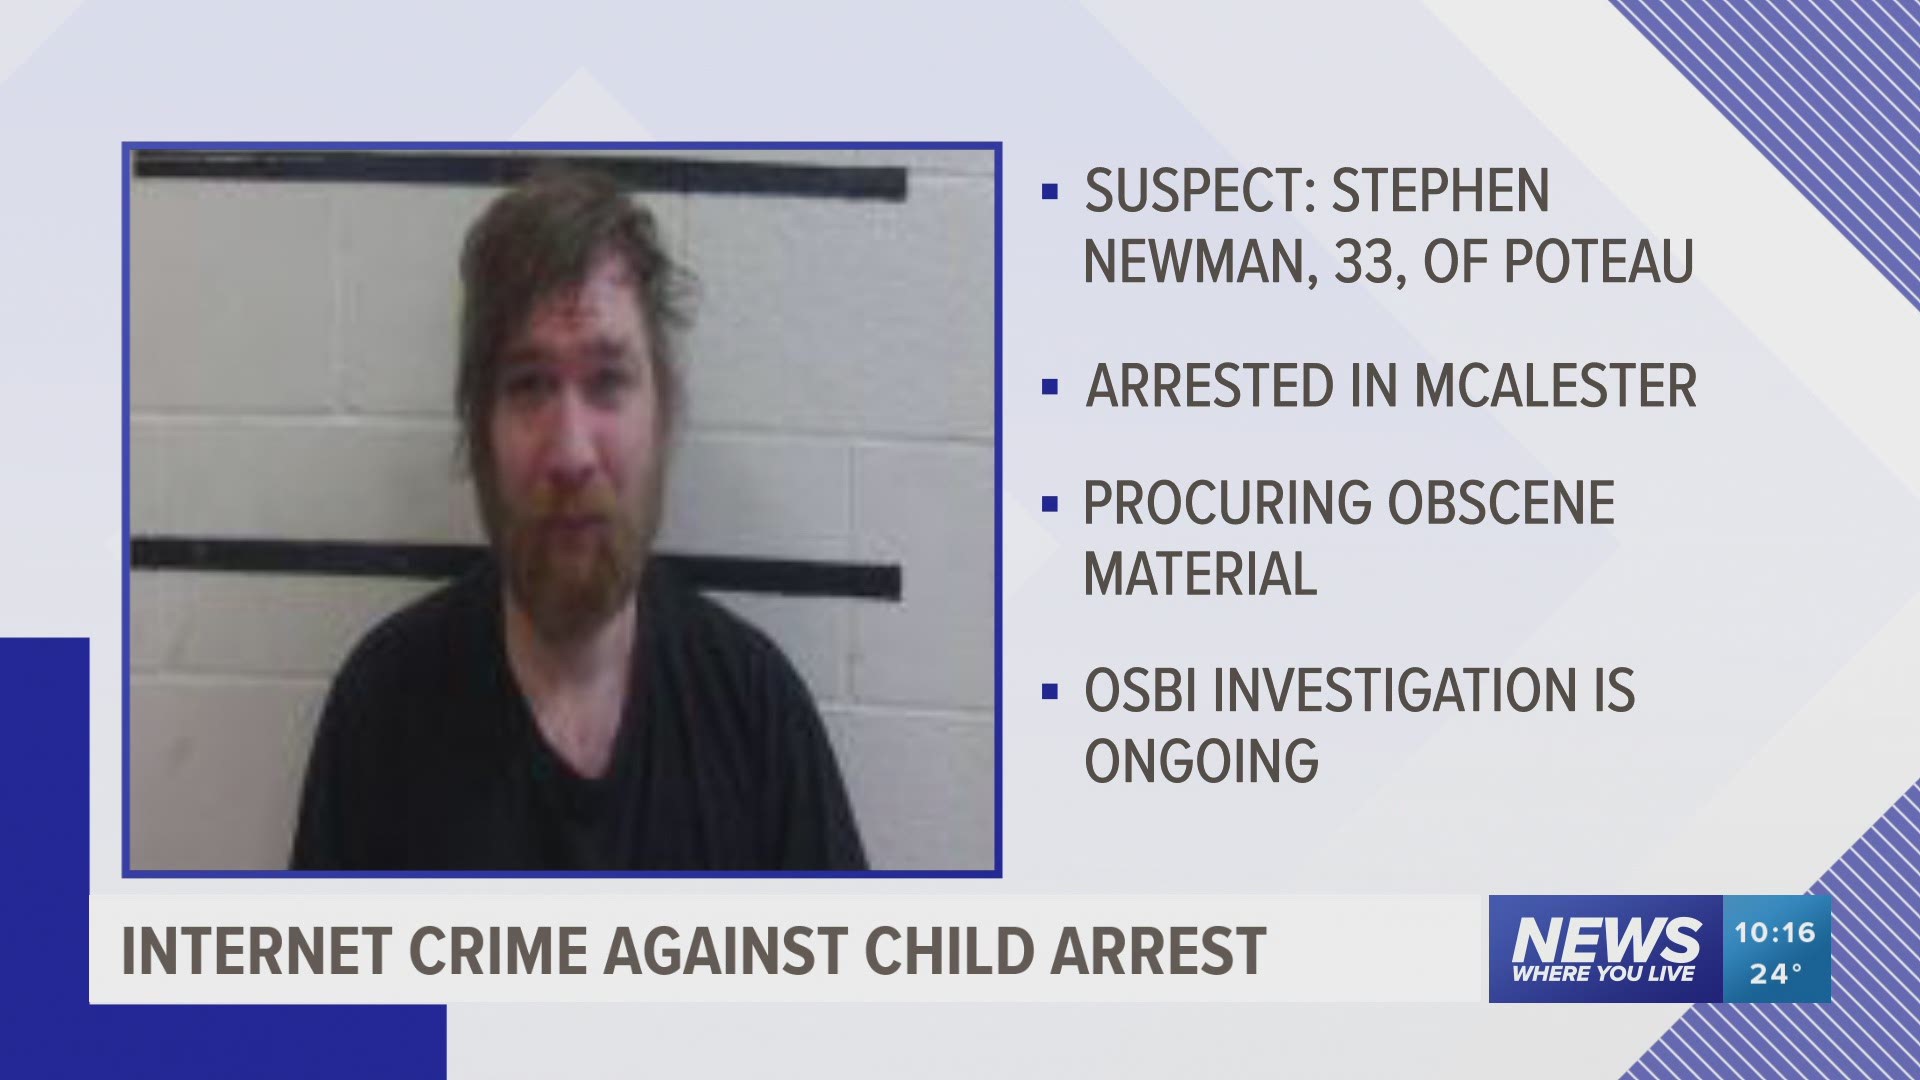 Stephen Newman allegedly received explicit photos and videos of a young girl in Idaho while chatting with her online. https://bit.ly/33yUFHs